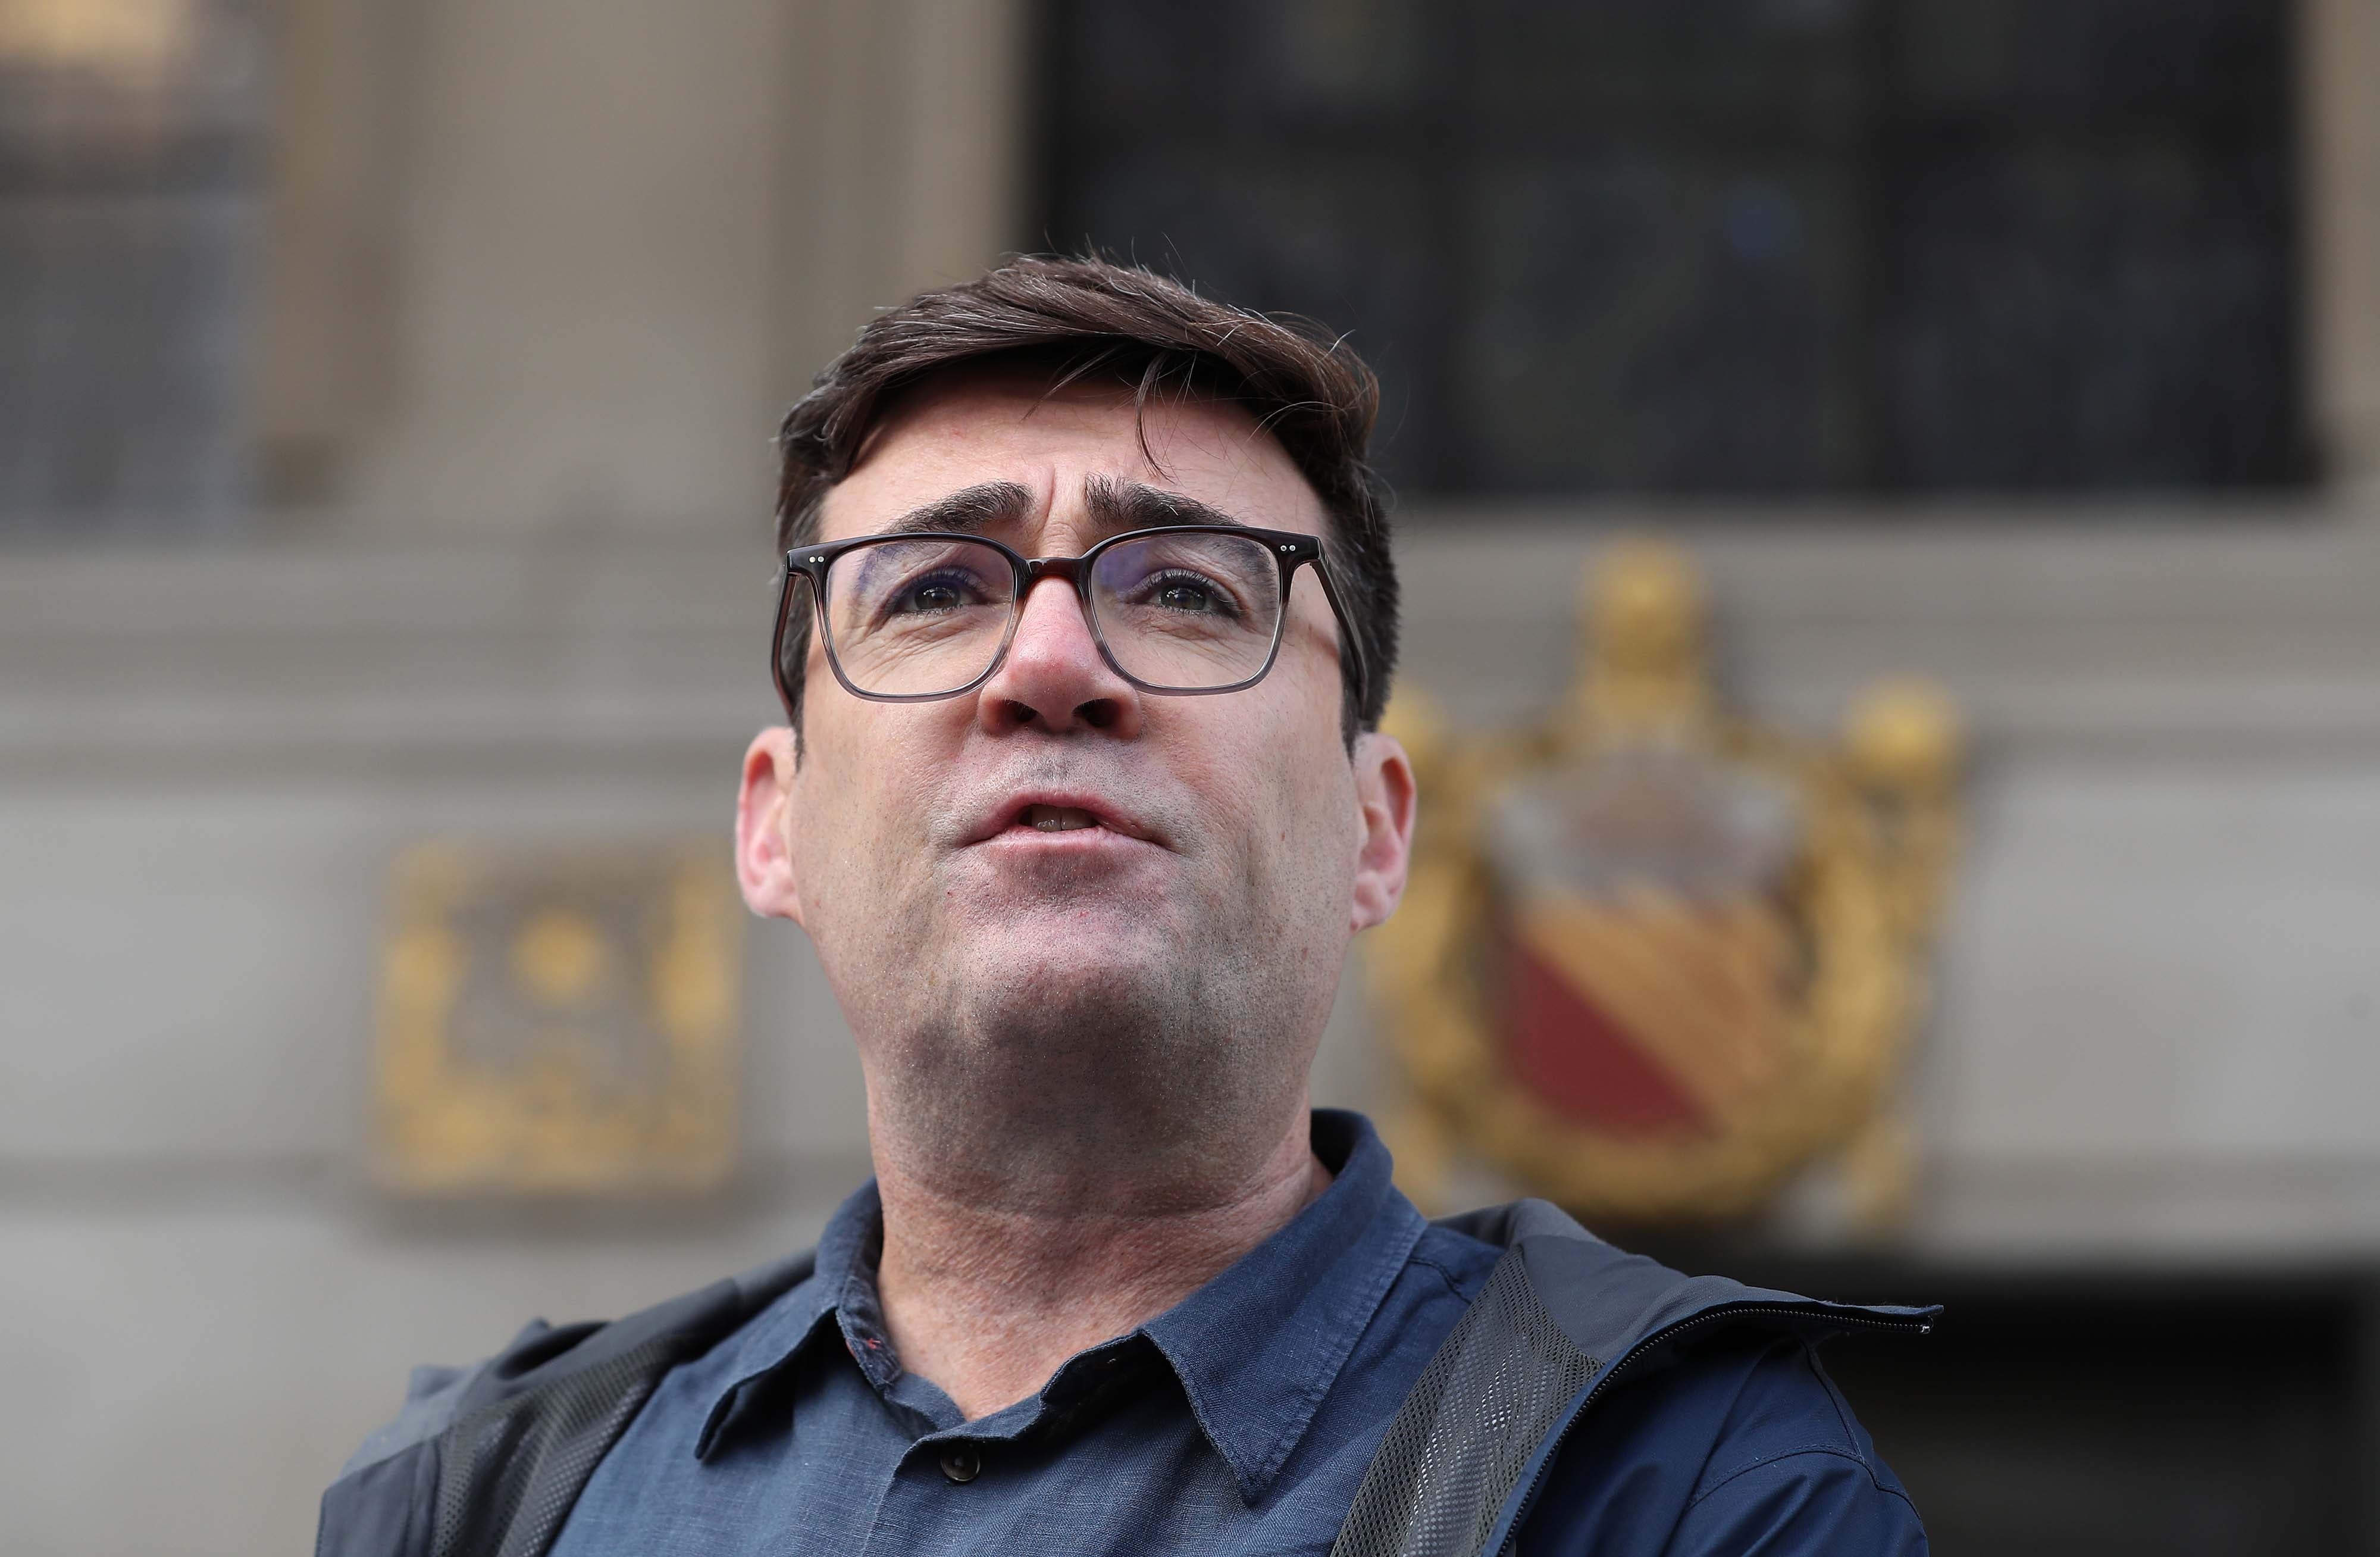 Greater Manchester mayor Andy Burnham has written to the PM expressing his disappointment at the outcome of talks